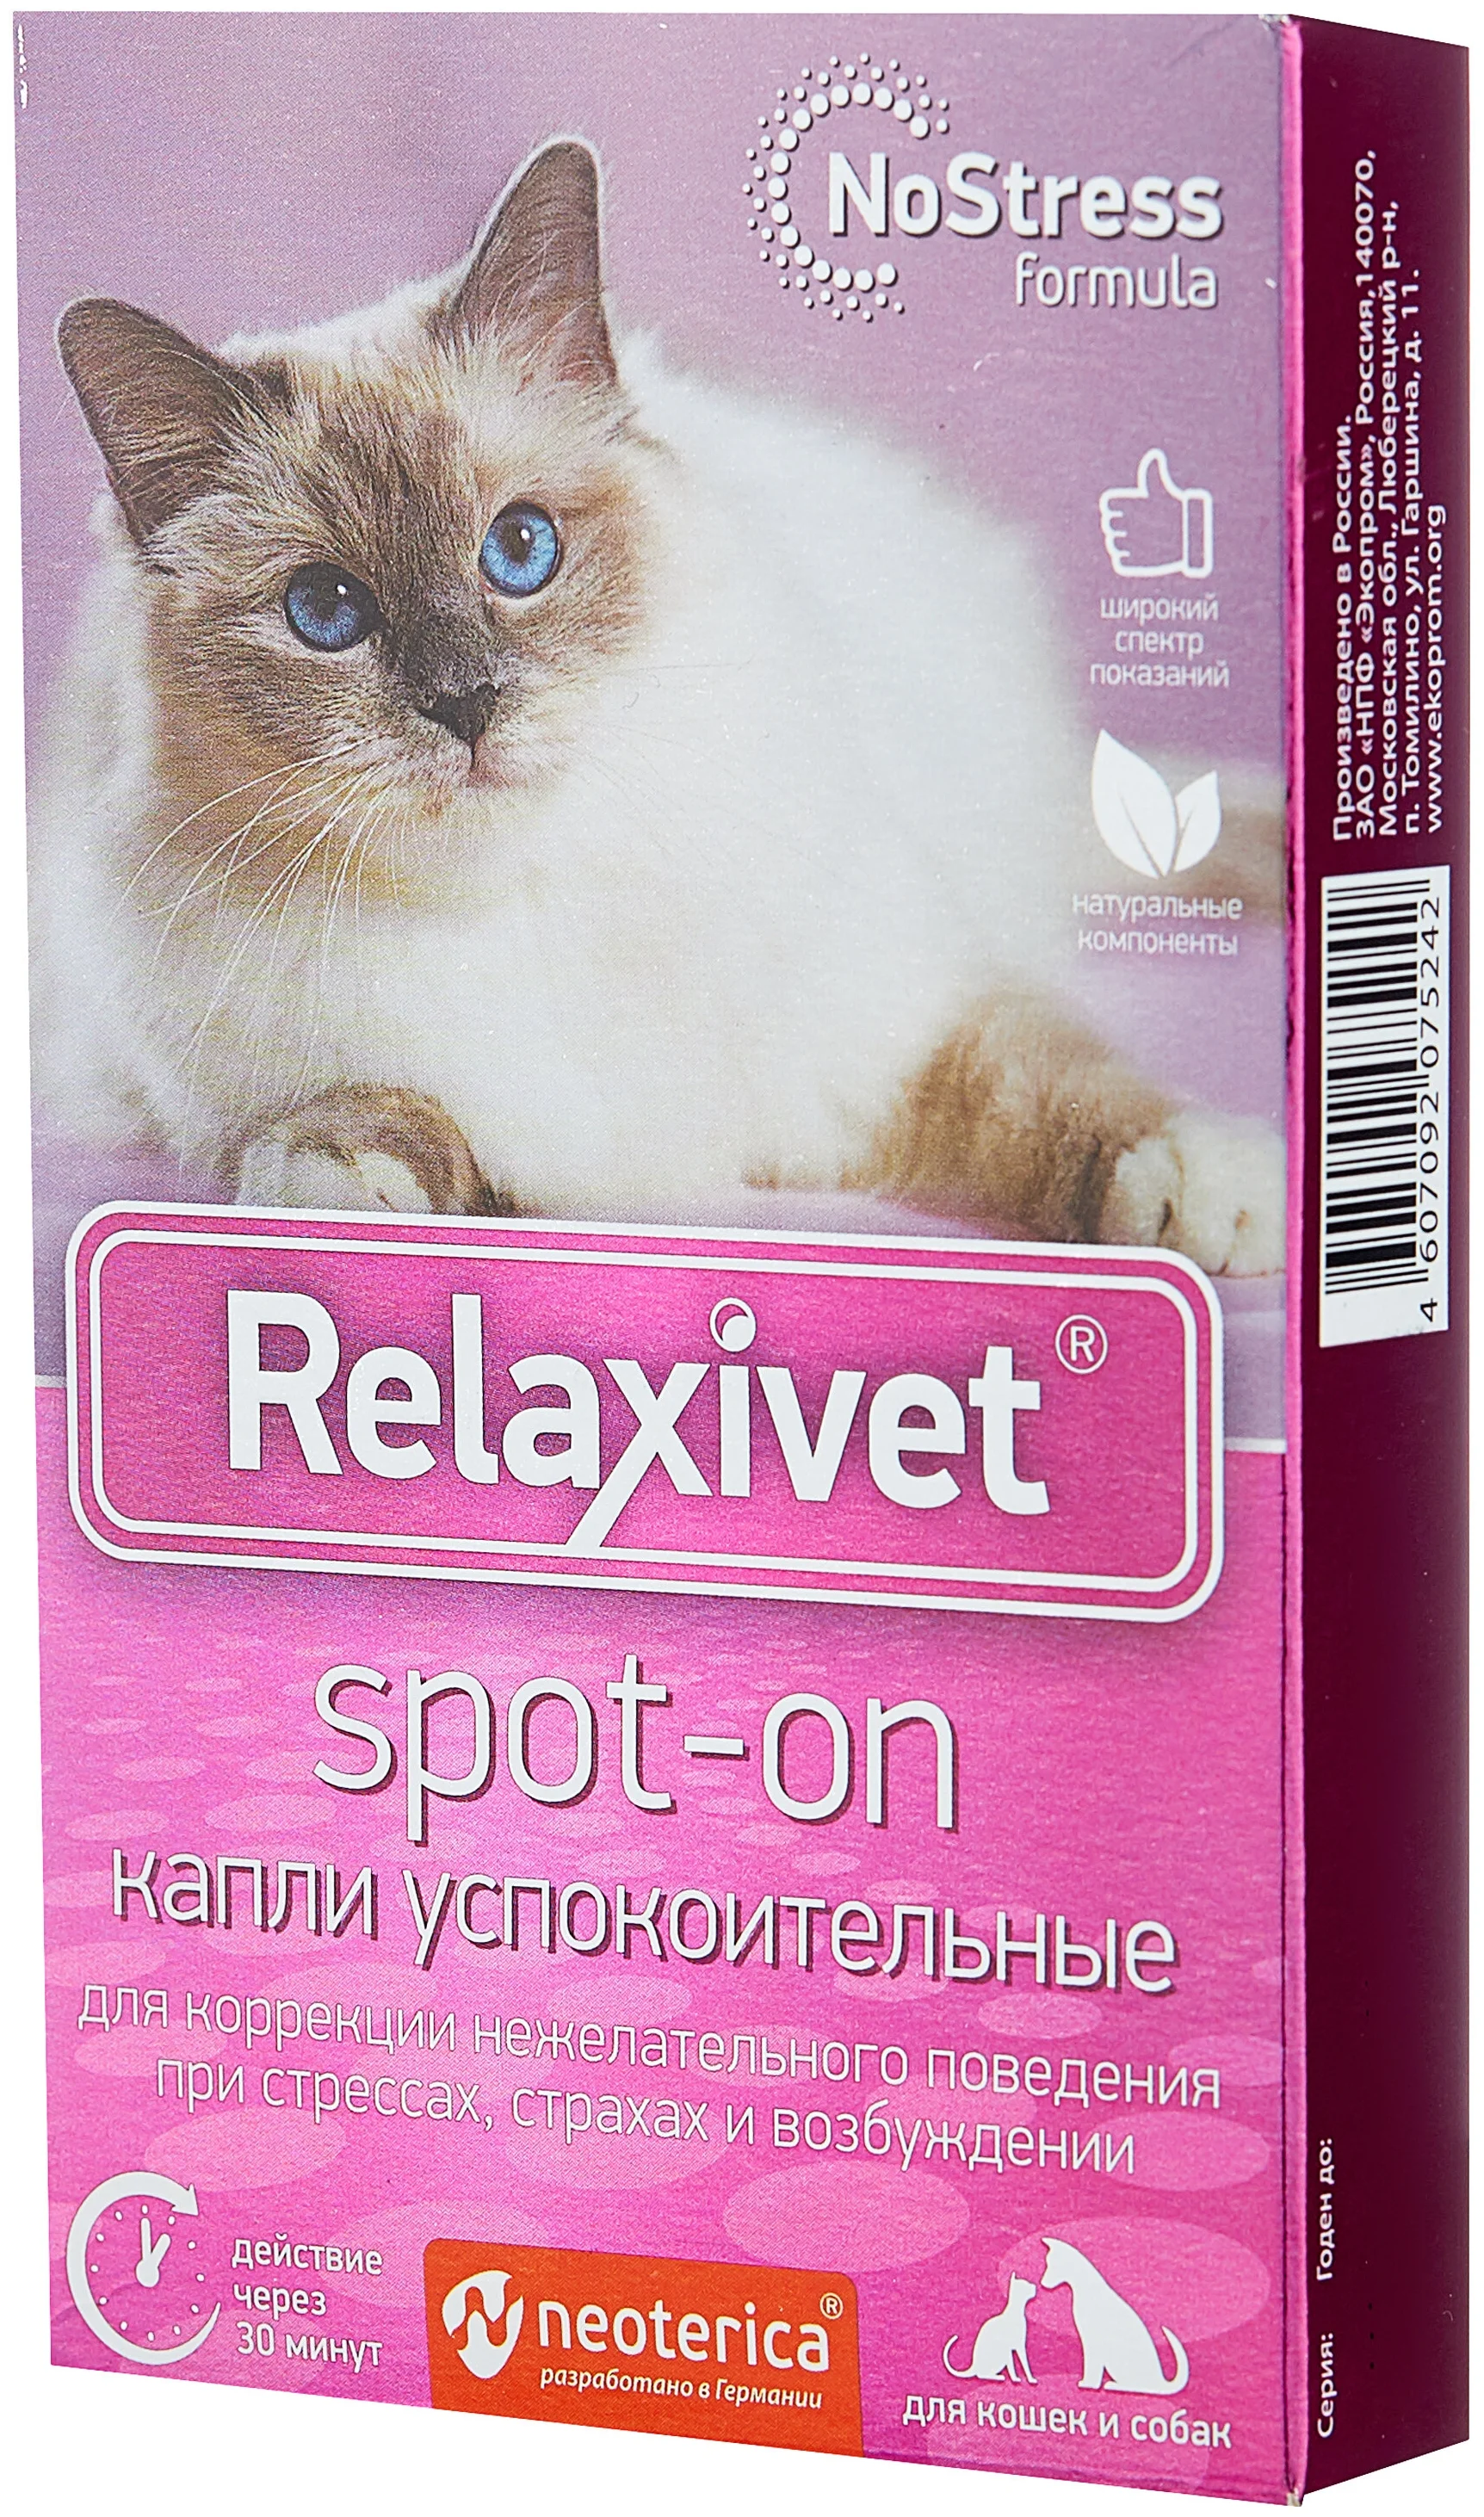 Relaxivet "Spot-on" - тип препарата: БАД